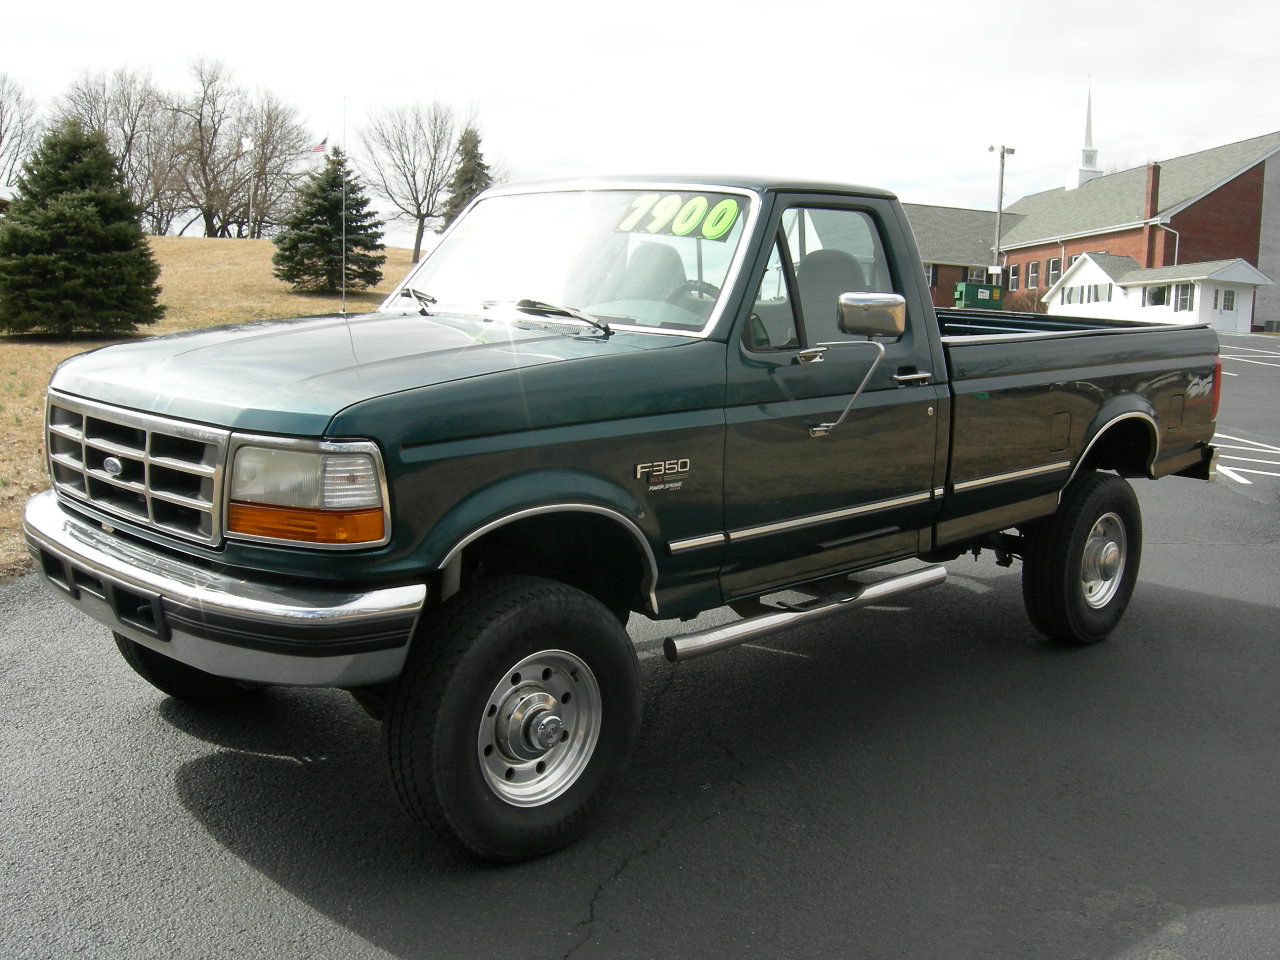 Ford powerstroke for sale in indiana #1